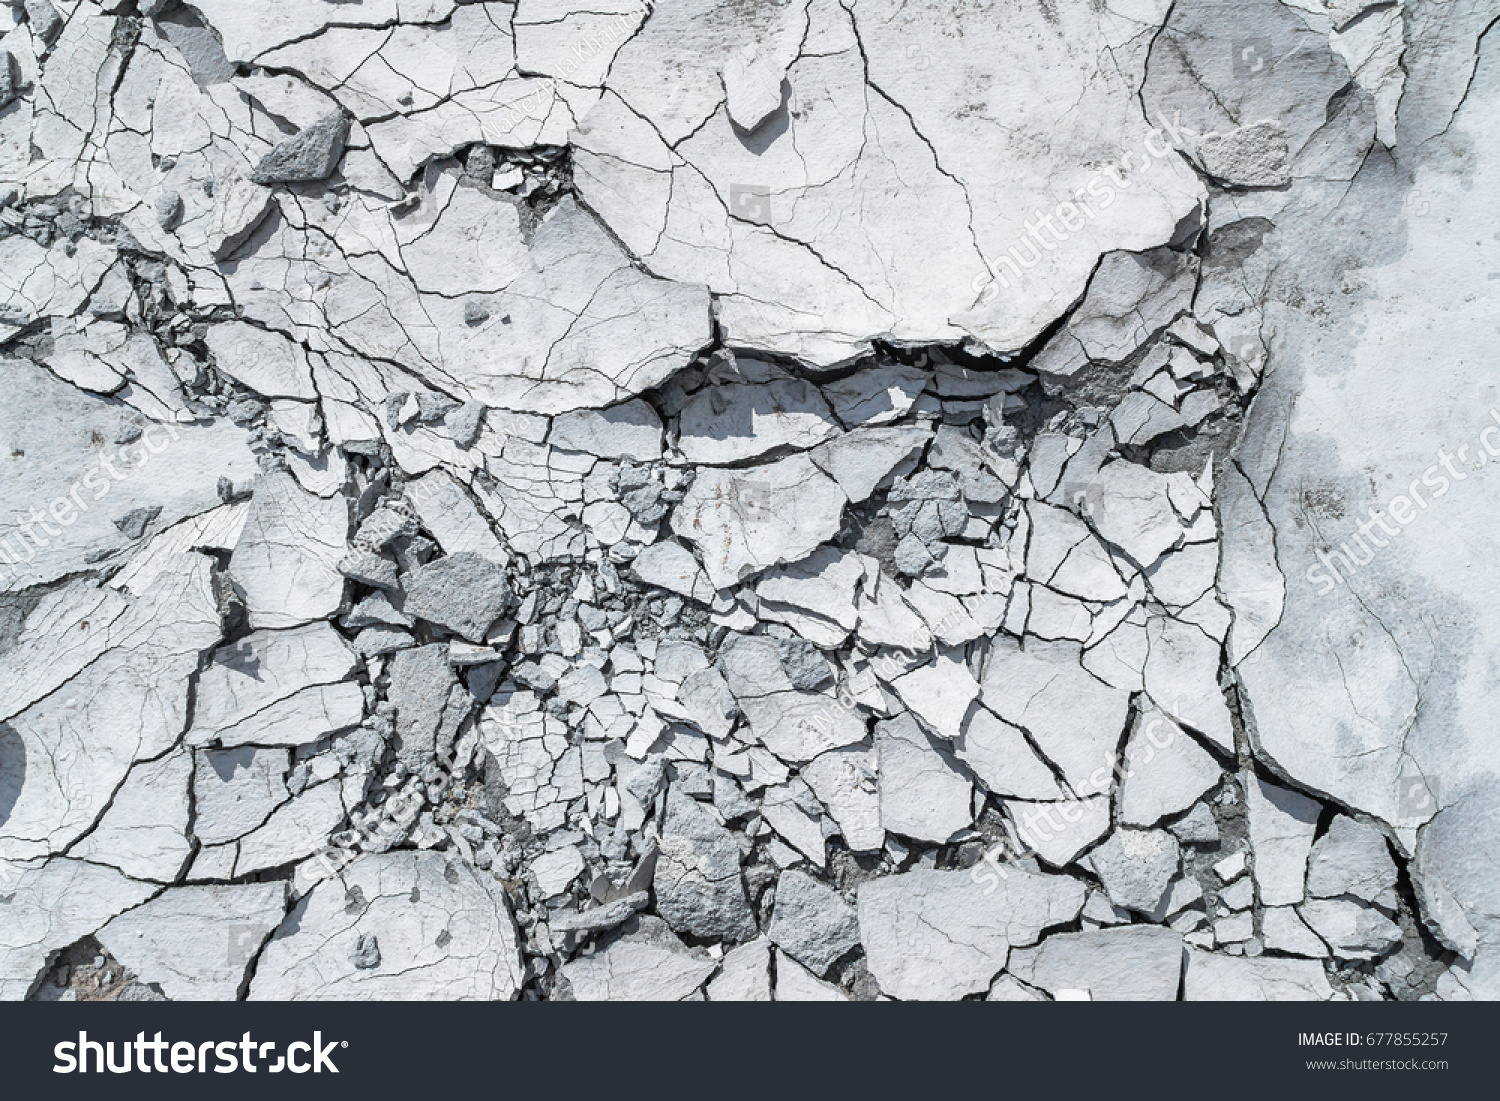 Cracked concrete texture background. Grey surface with cracks close up. A lot of pieces of splintered plaster. Abstract concept of split, dissent, disagreement, discord. Sunny day with shadows. #677855257